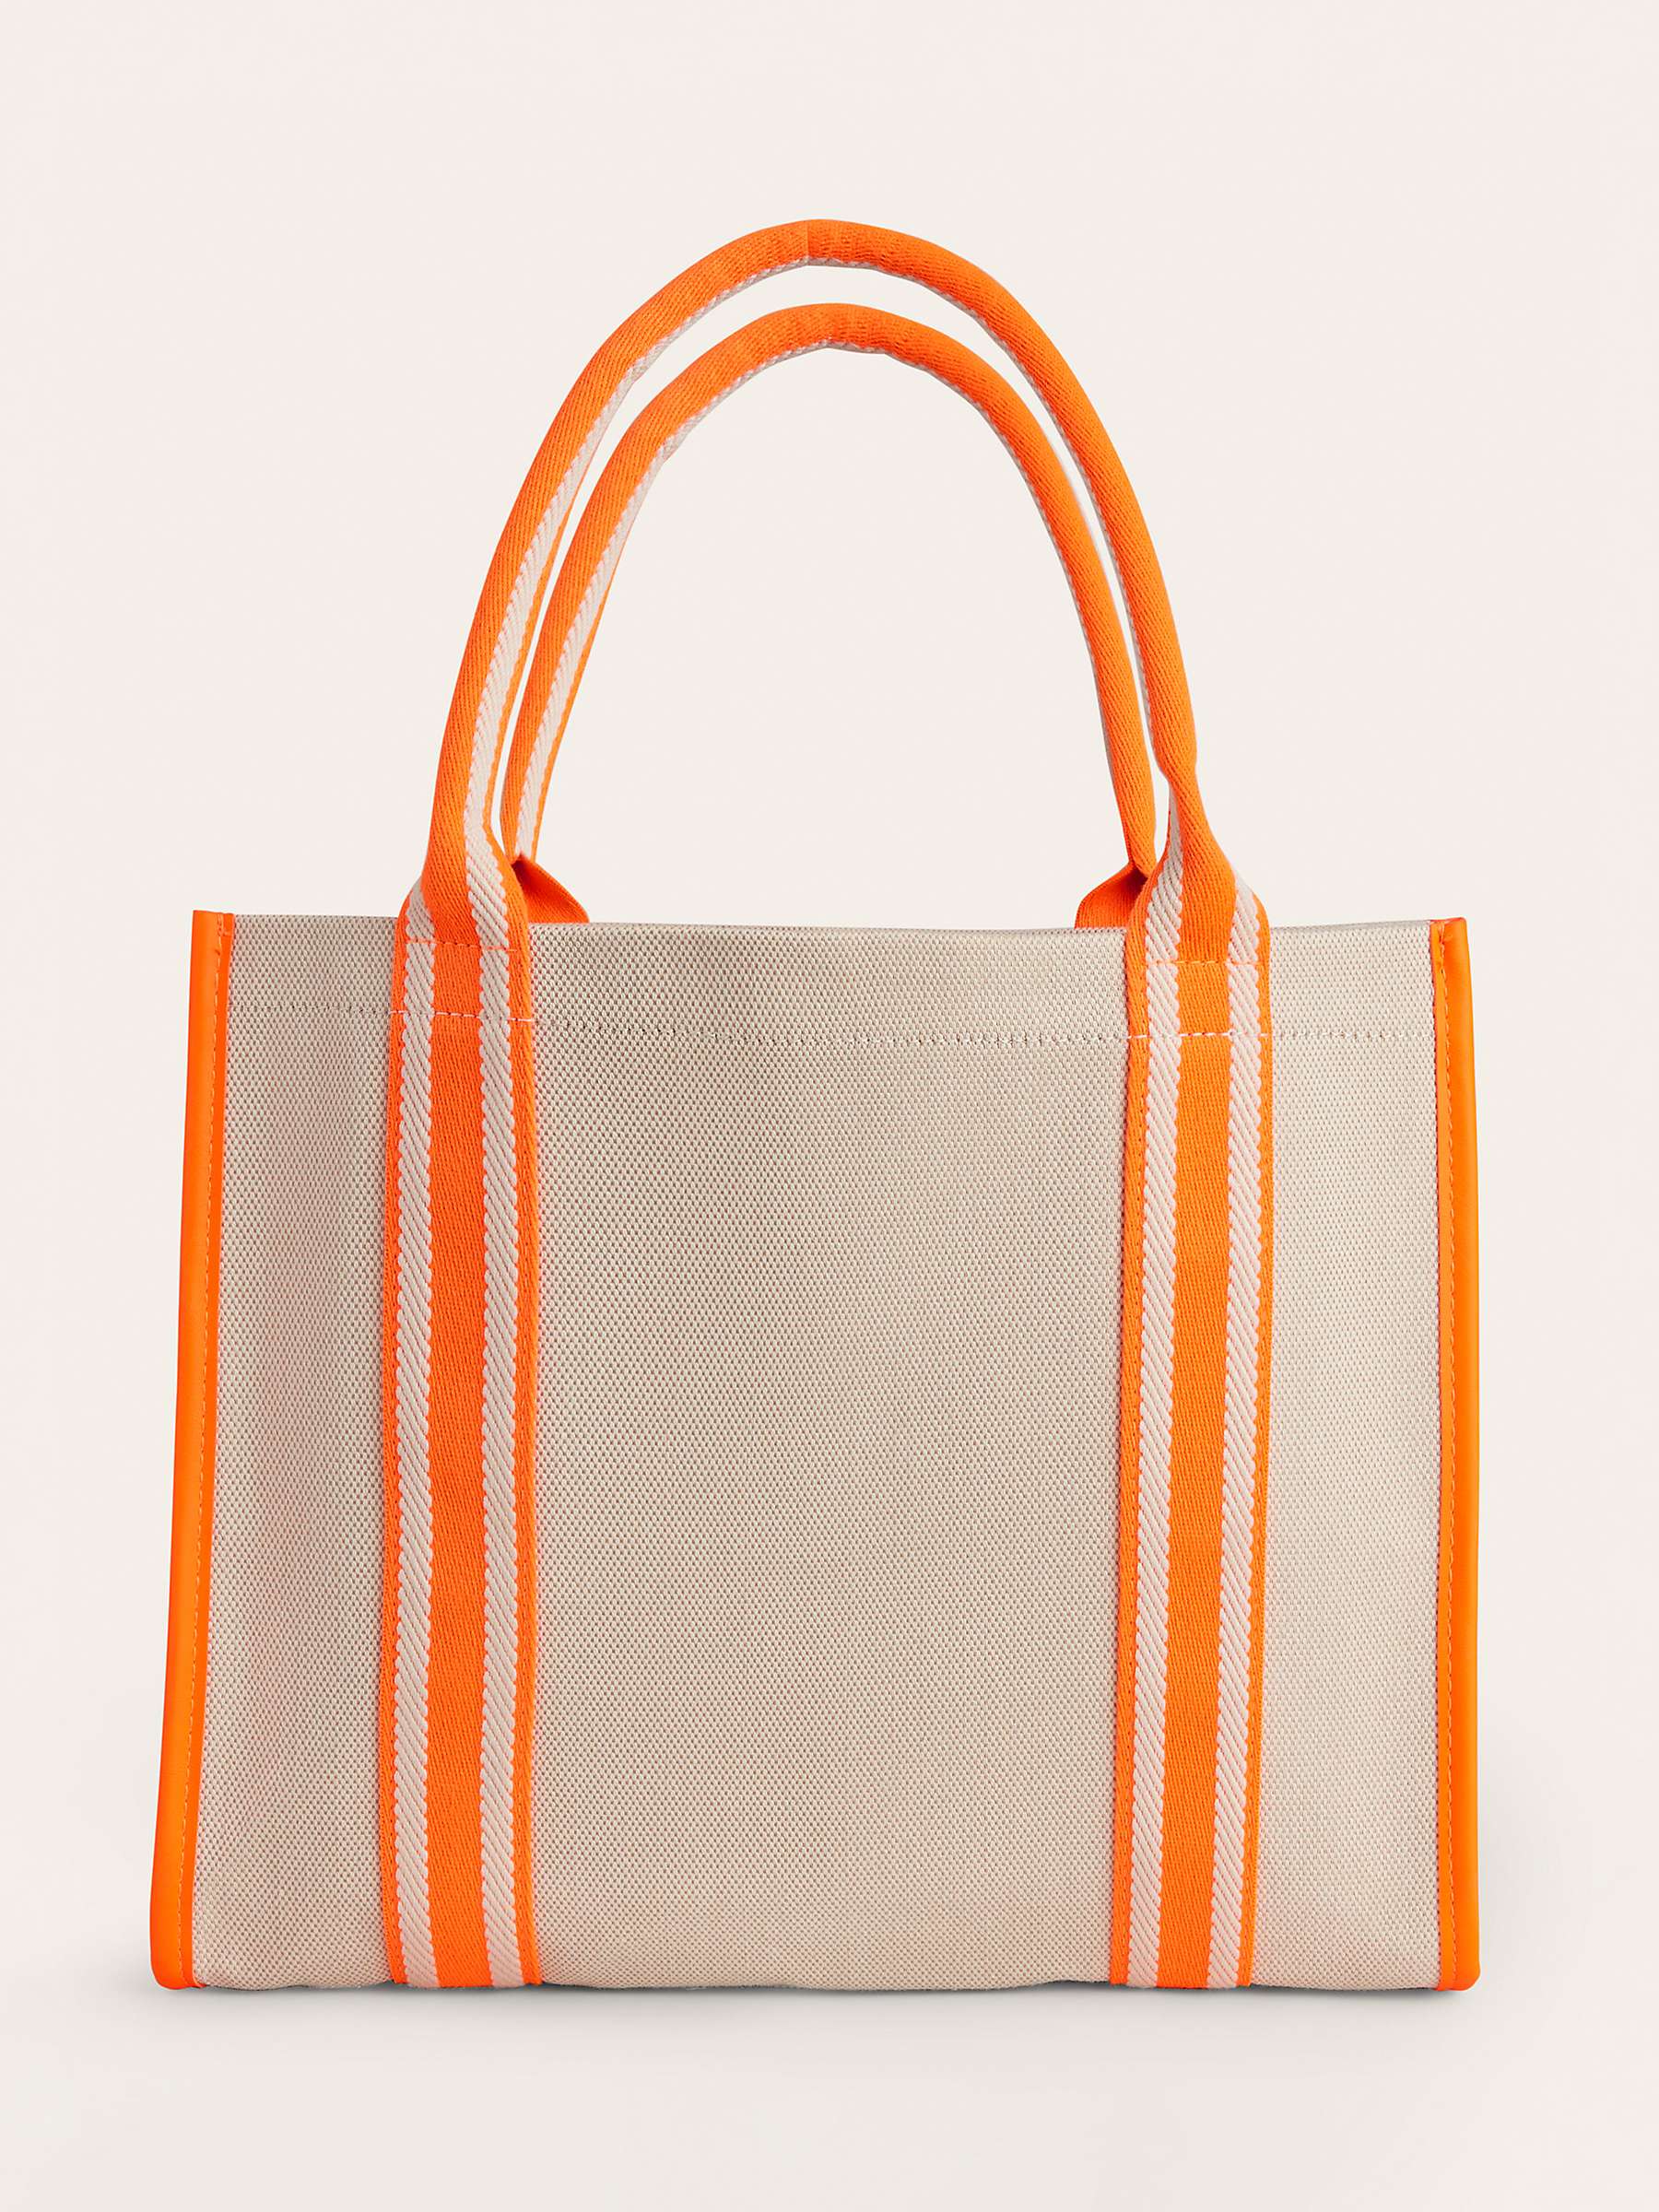 Boden Structured Canvas Tote Bag at John Lewis & Partners